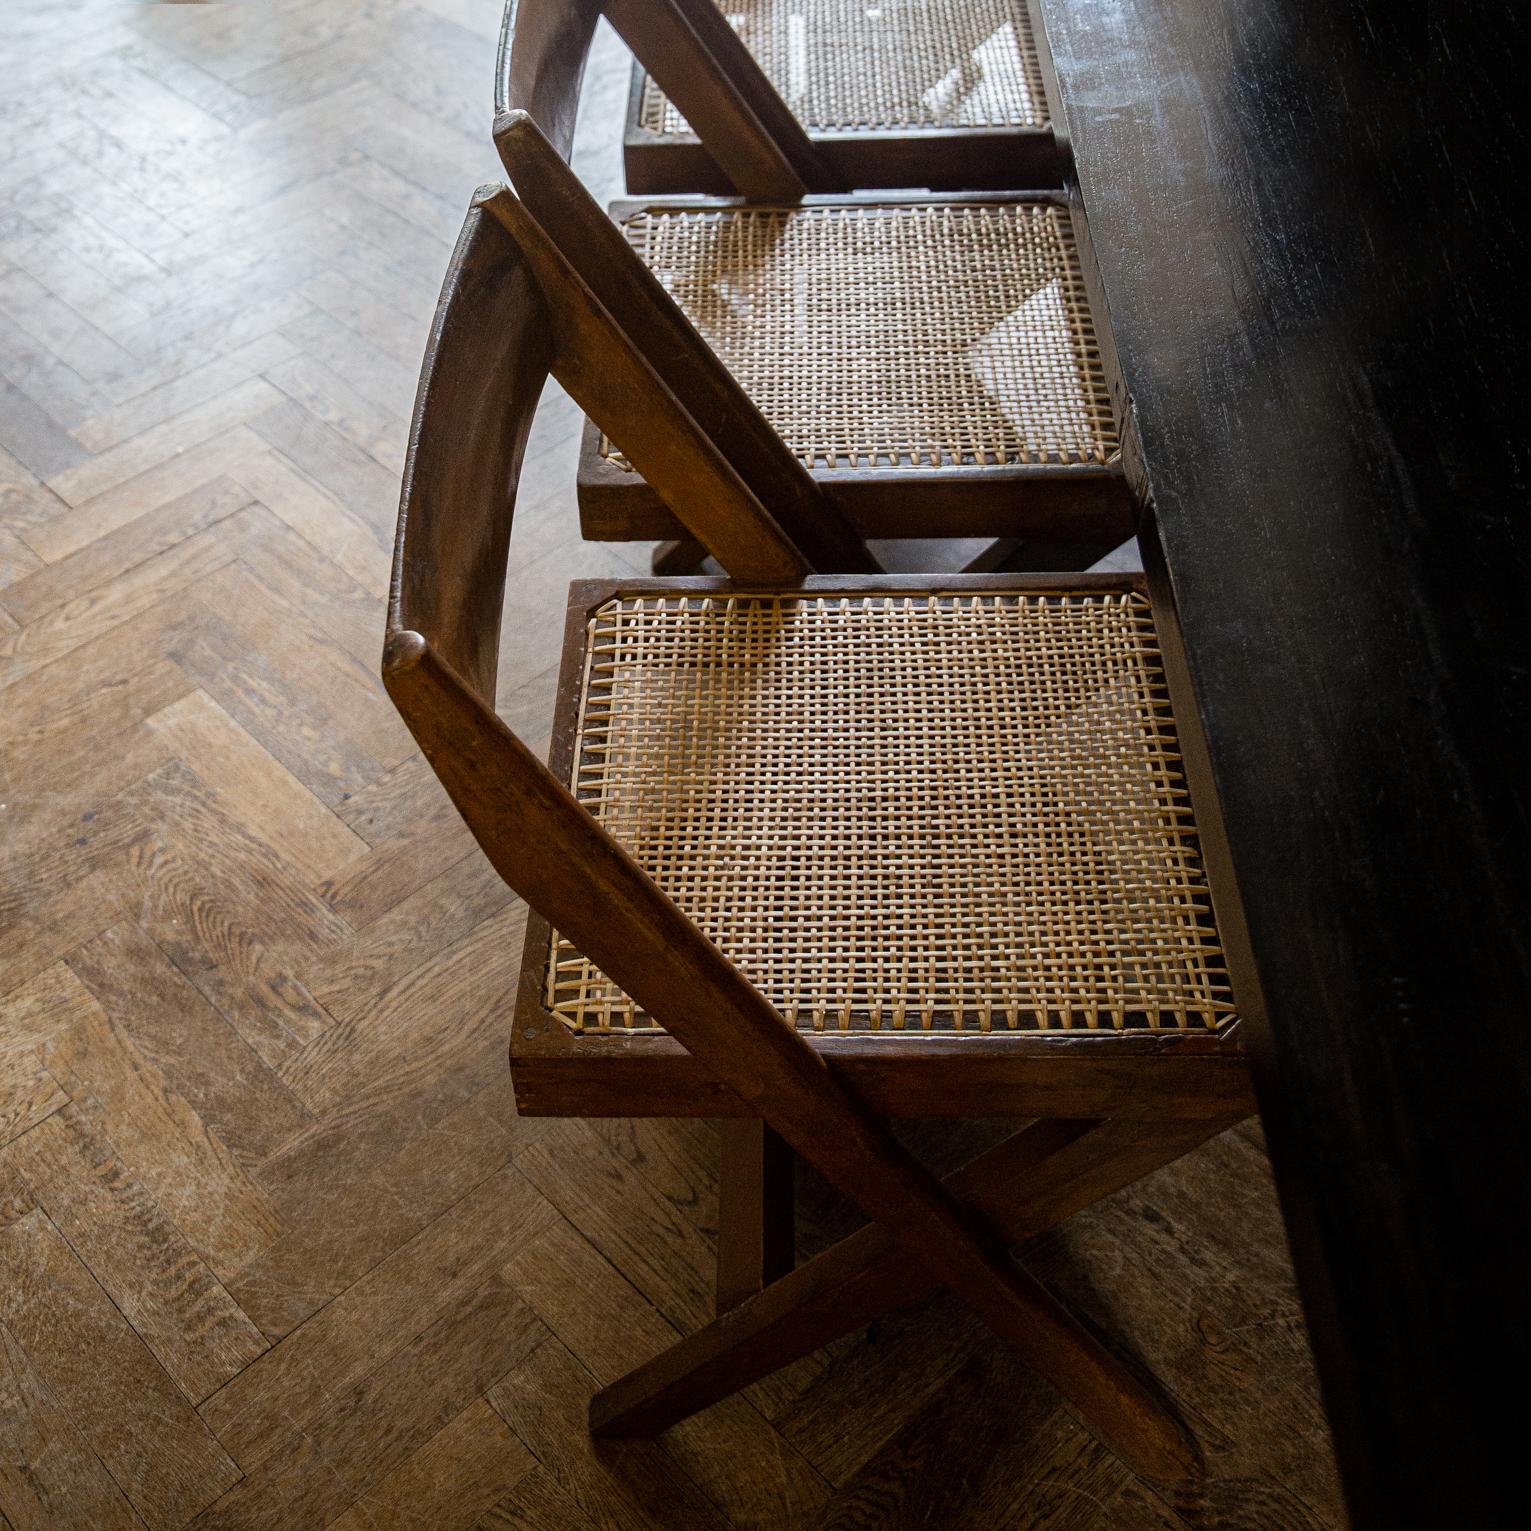 Four X Frame Chairs by Pierre Jeanneret & Eulie Chowdhury, Chandigarh India 1959 For Sale 5